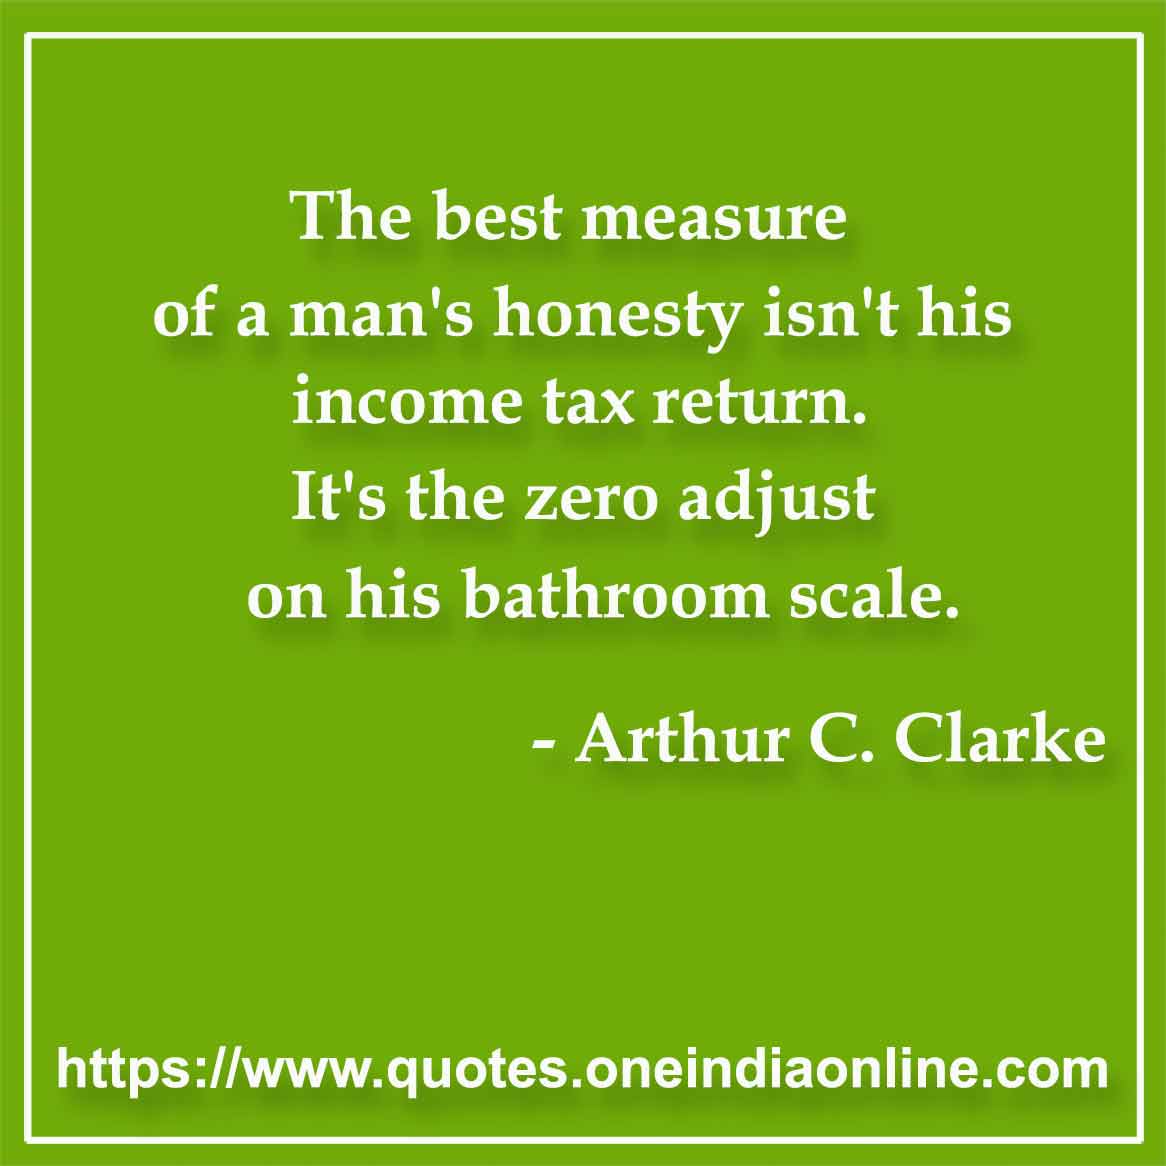 The best measure of a man's honesty isn't his income tax return. It's the zero adjust on his bathroom scale.

- Honesty Quotes by Arthur C. Clarke